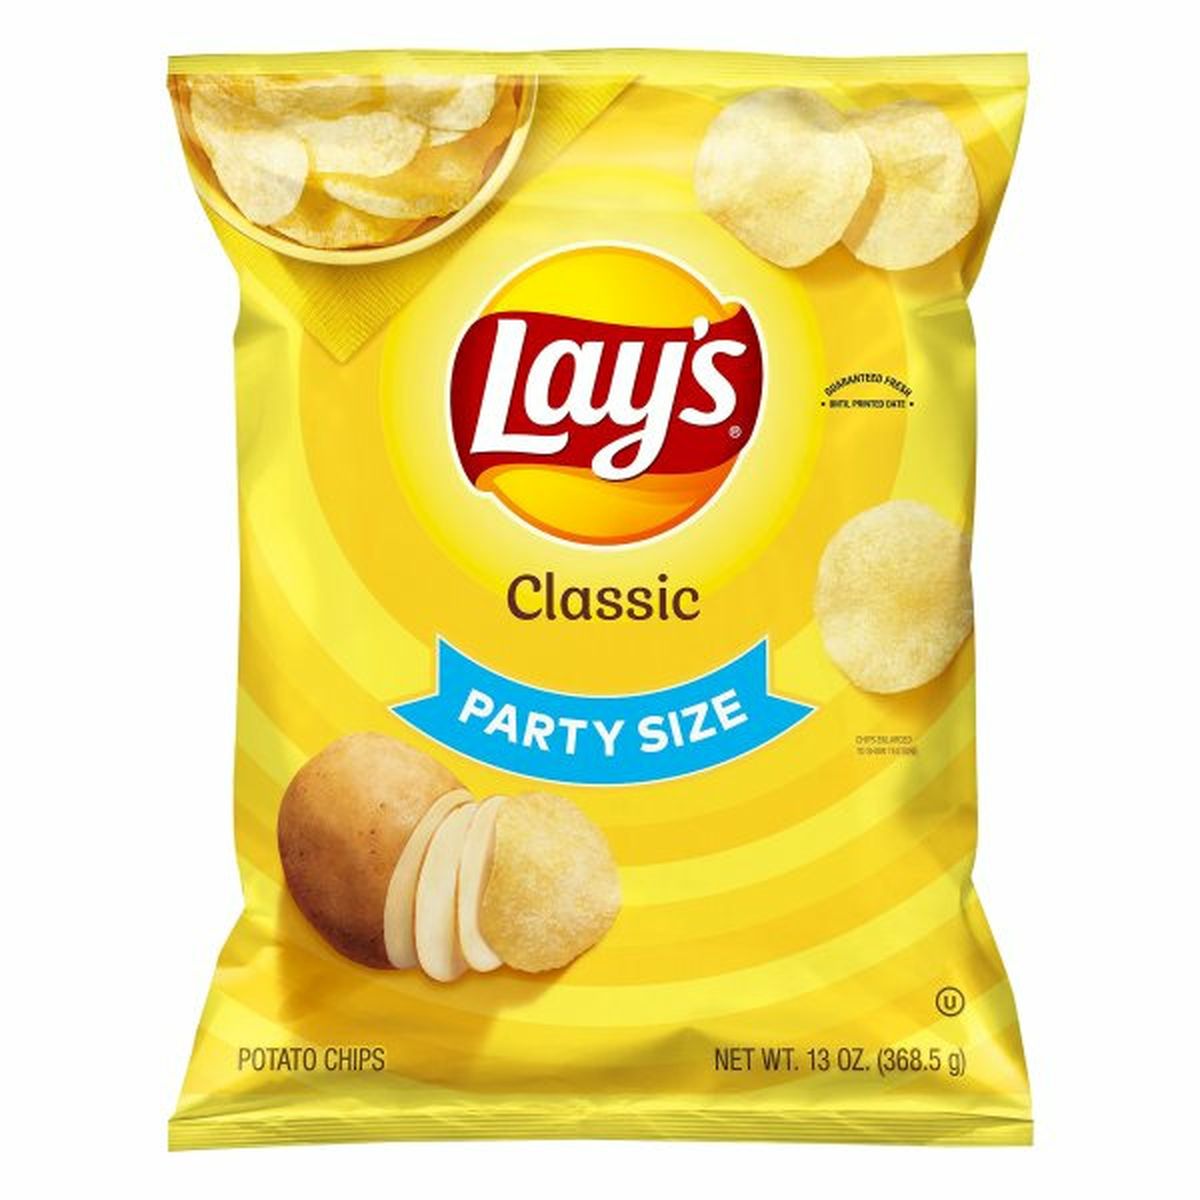 Calories in Lay's Potato Chips, Classic, Party Size